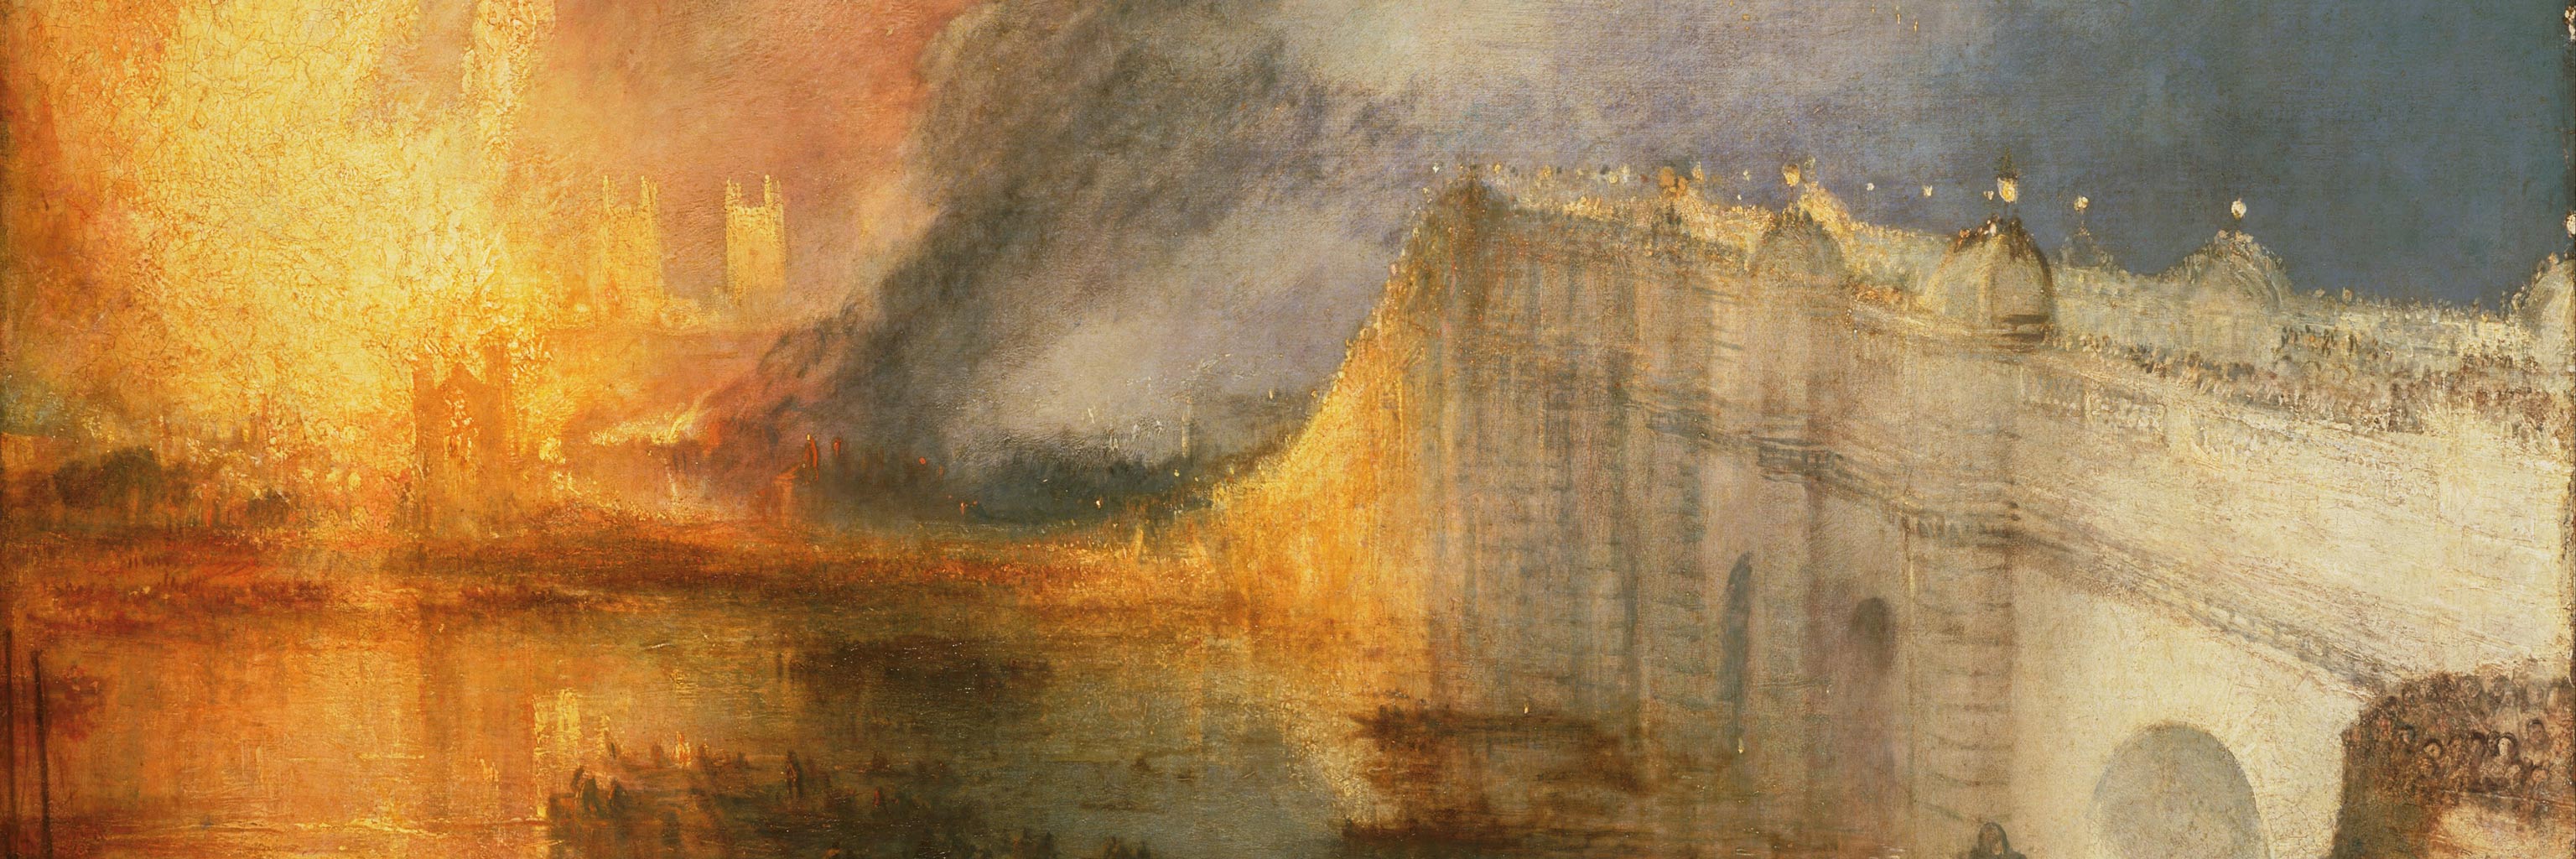 Joseph_Mallord_William_Turner,_English_-_The_Burning_of_the_Houses_of_Lords_and_Commons,_October_16,_1834_-_Google_Art_Project